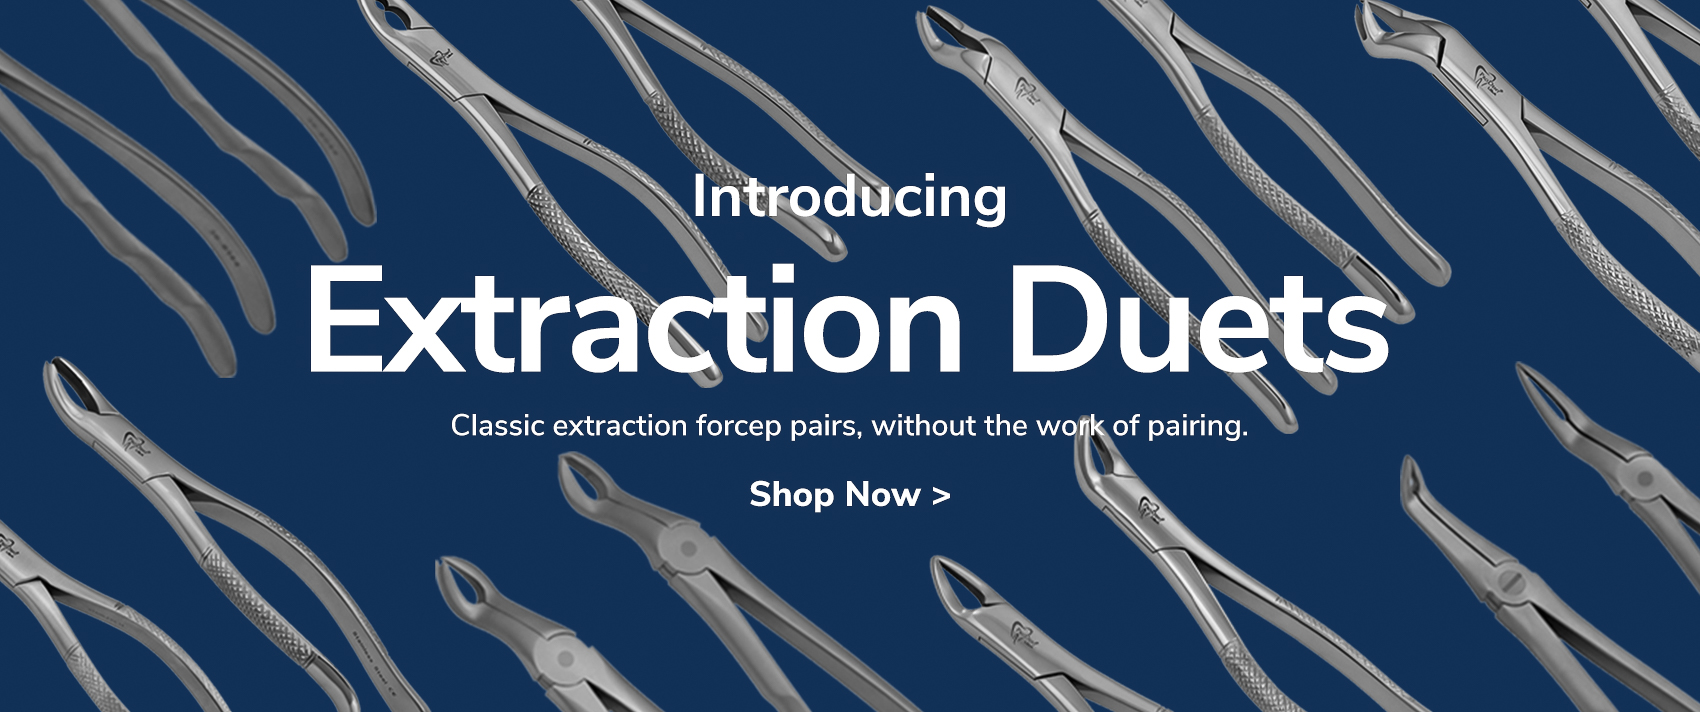 Introducing Extraction Duets